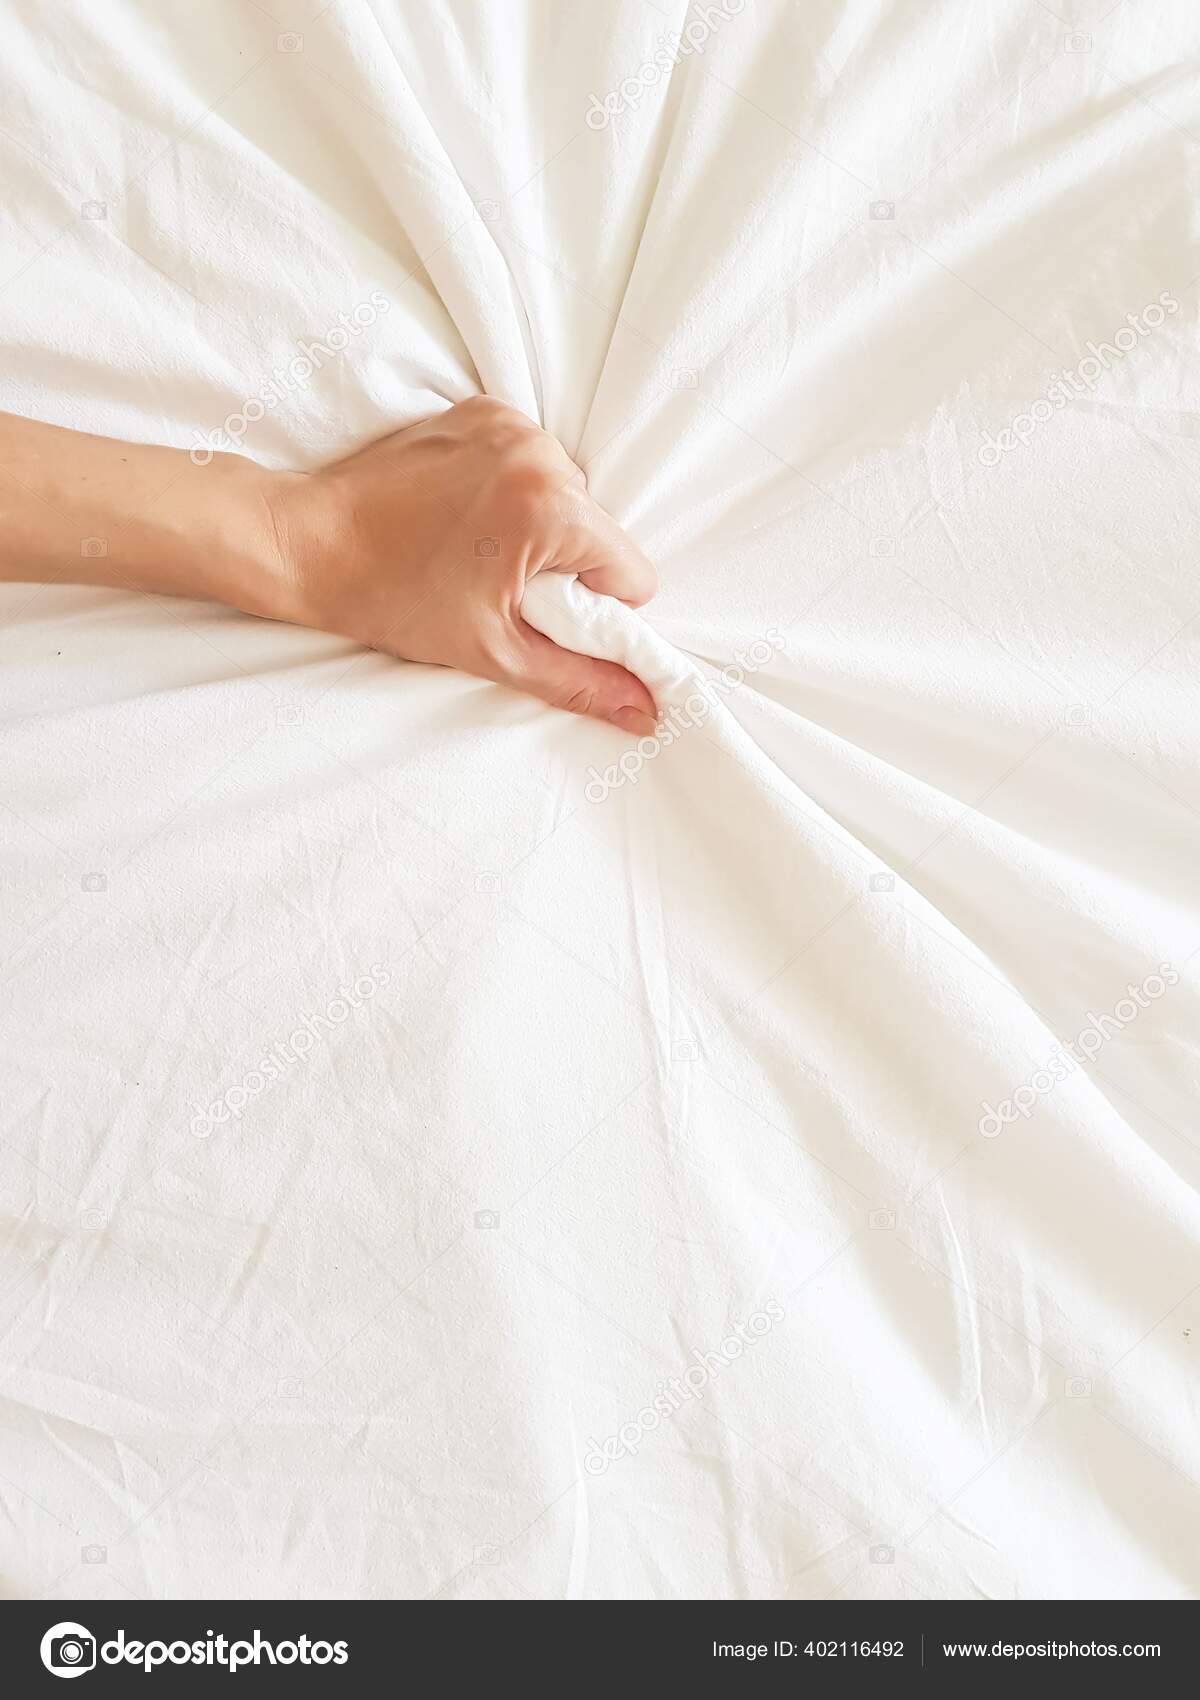 Close up sexy woman hand pulling and squeezing white sheets in ecstasy in bed. Orgasm on white